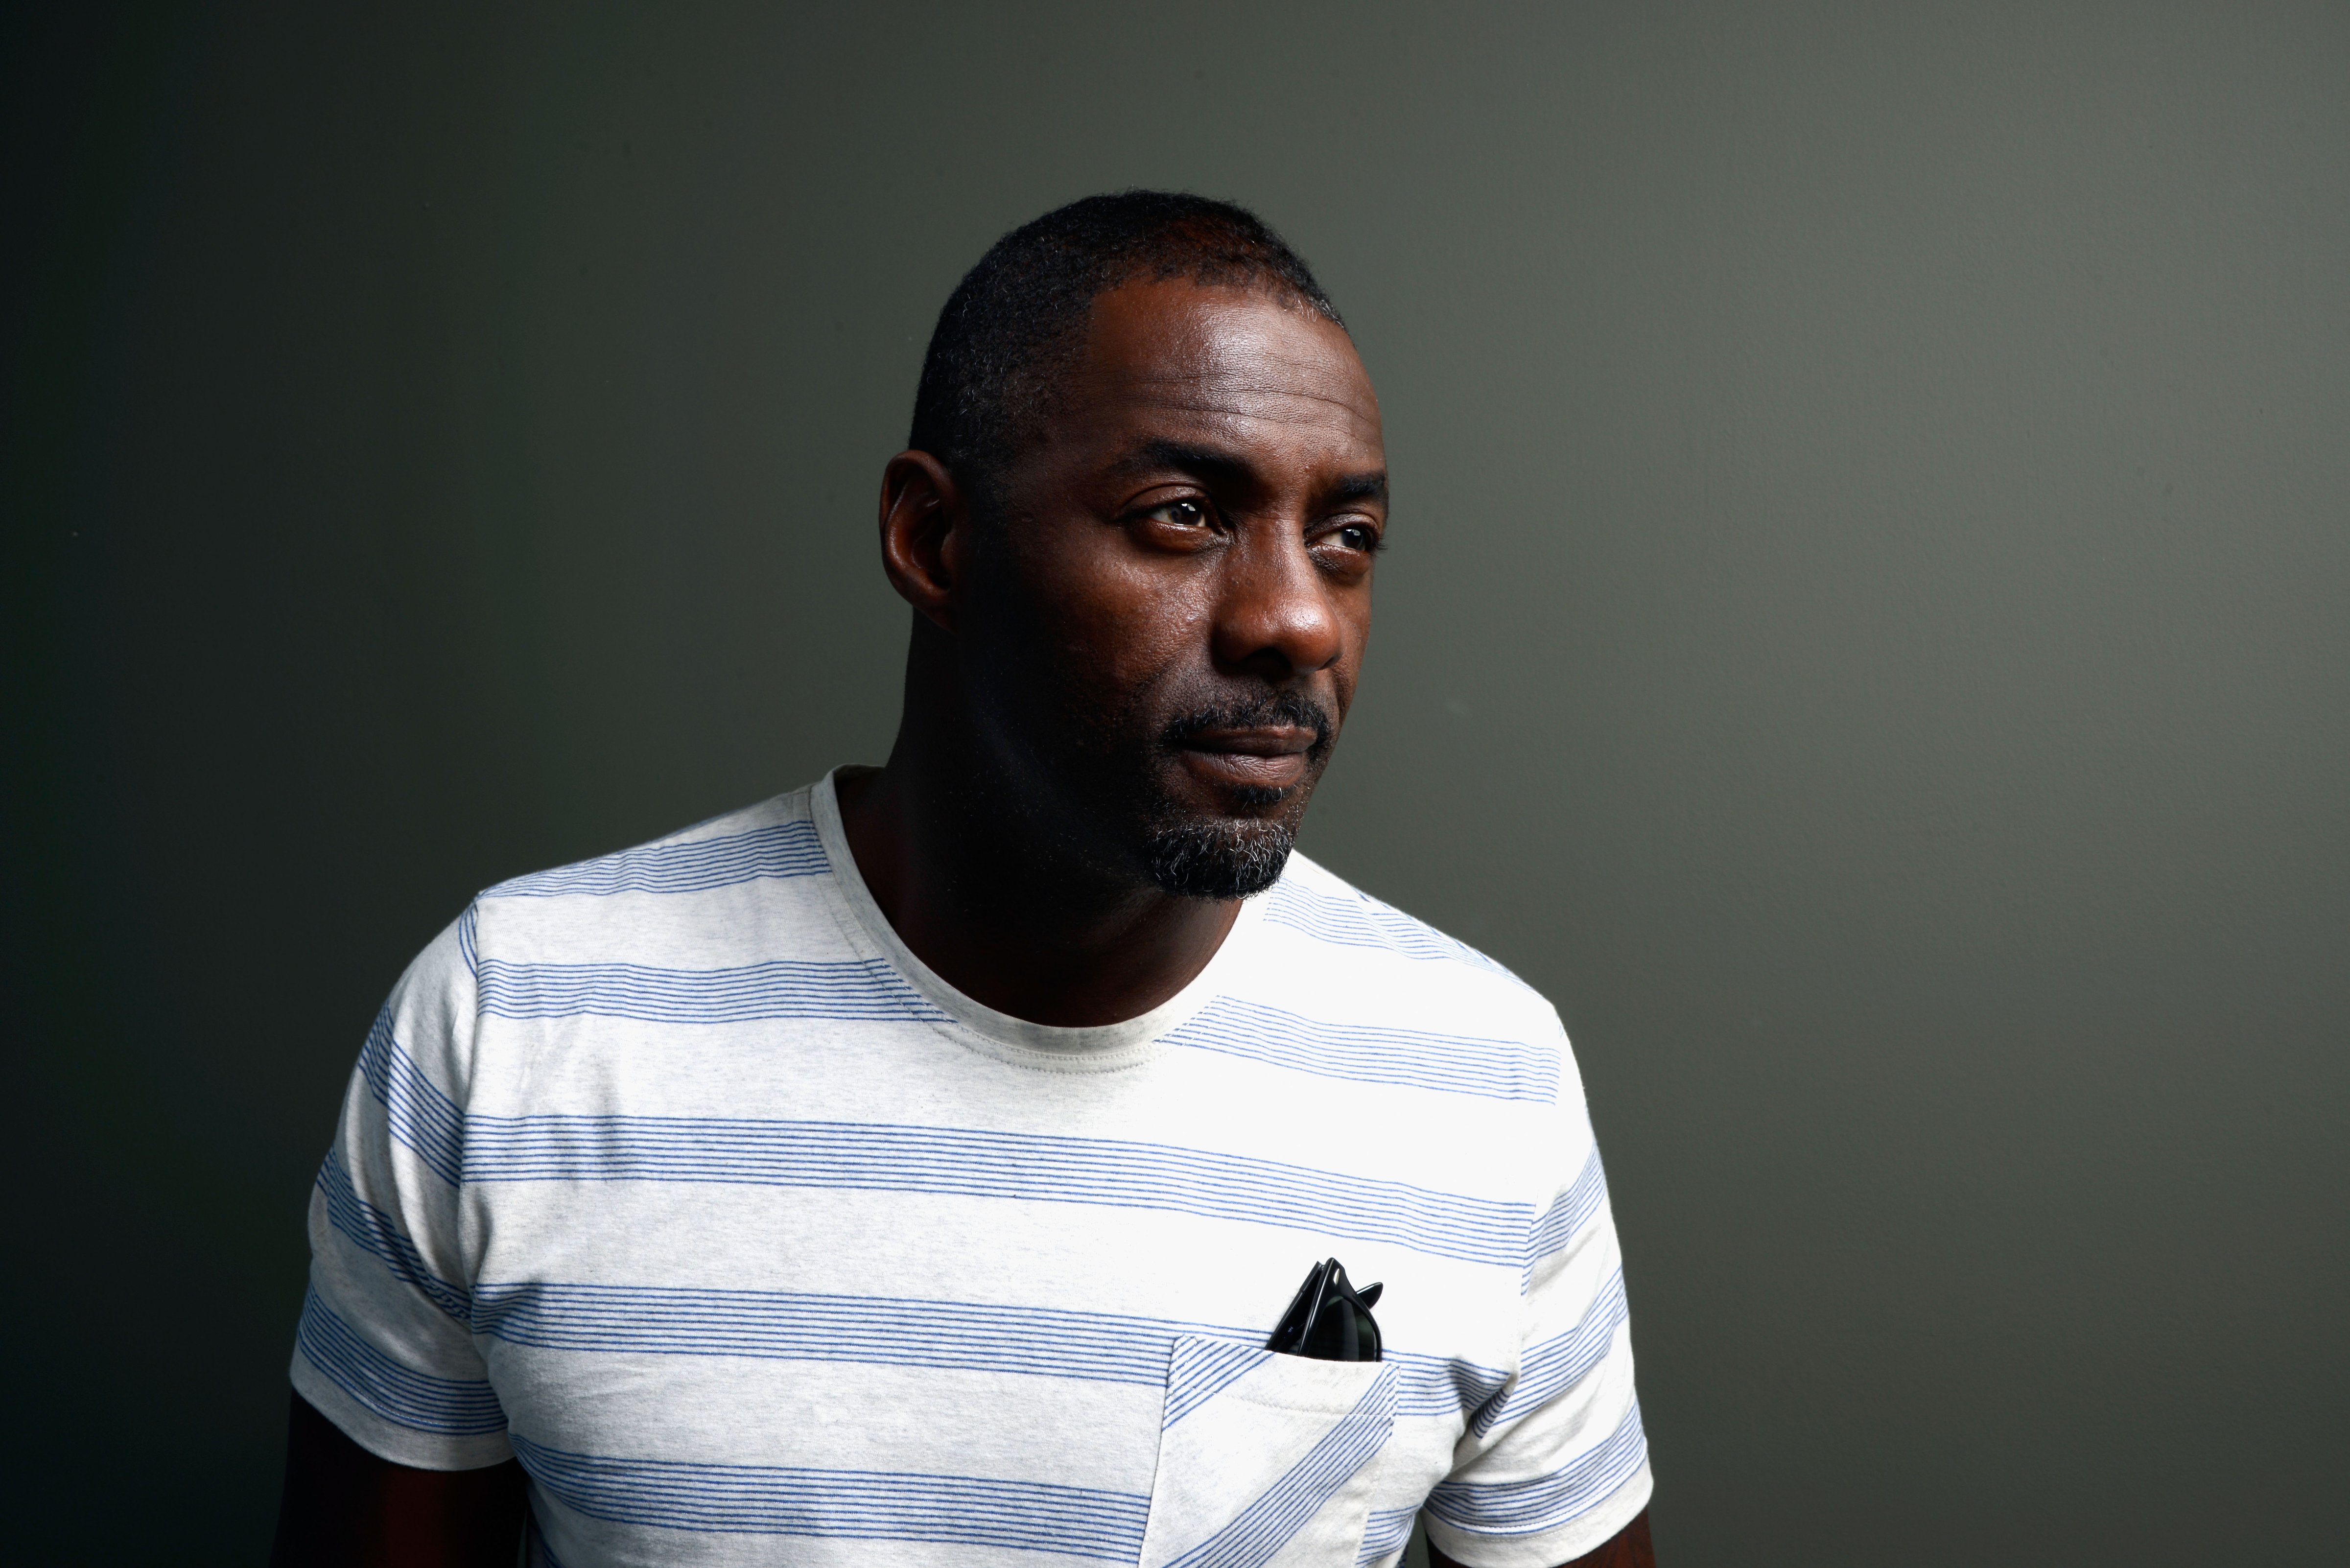 Actor Idris Elba of poses at the Guess Portrait Studio during the 2013 Toronto International Film Festival on September 8, 2013 in Toronto. (Larry Busacca—Getty Images)